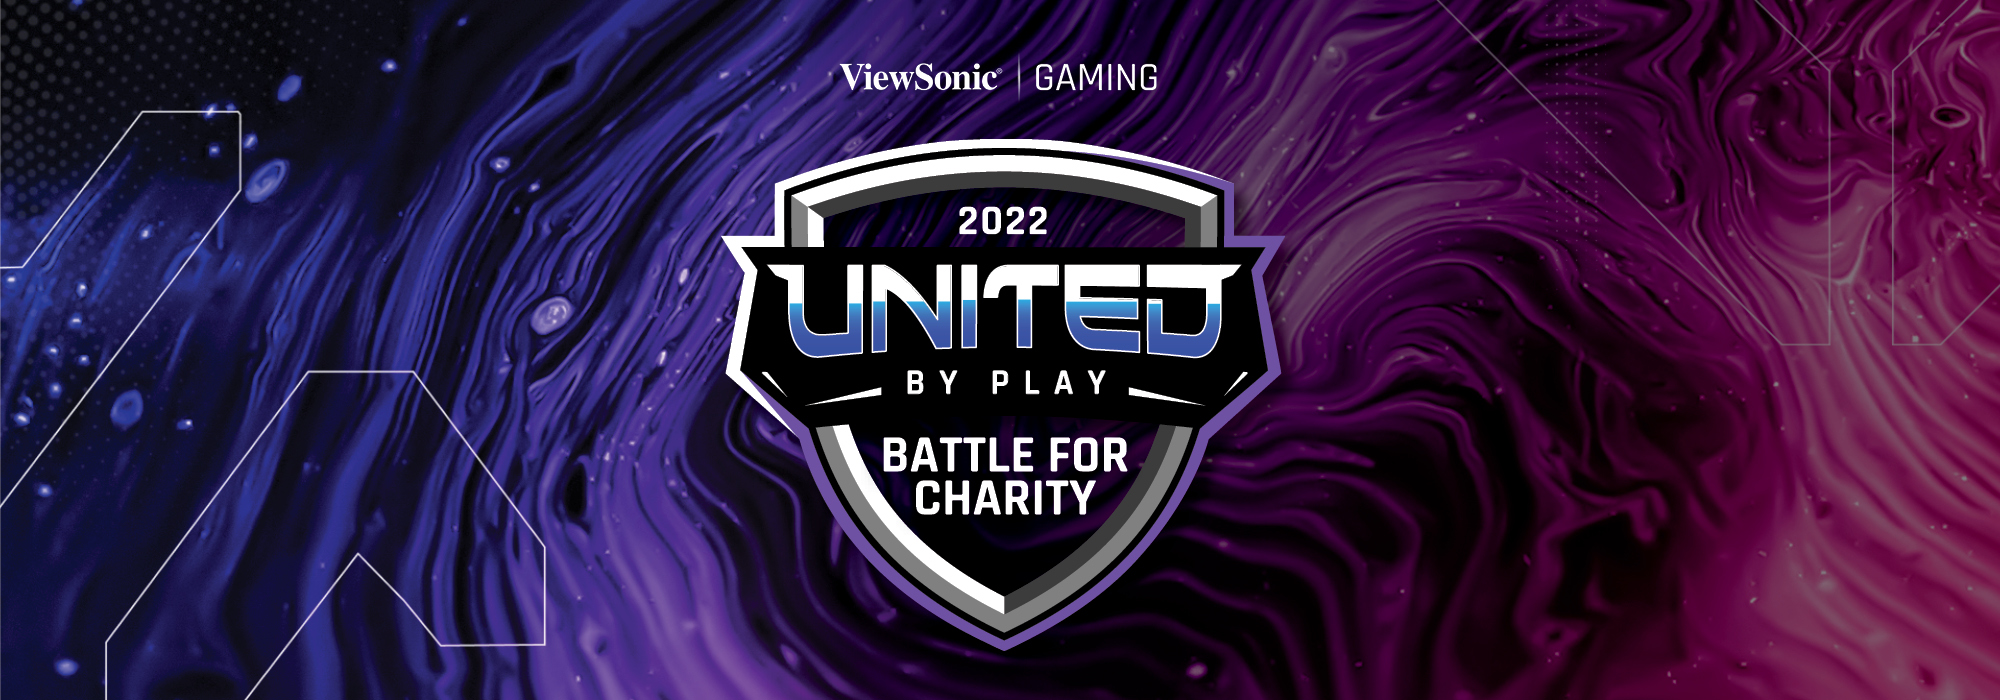 ViewSonic Kicks off 2022 Philanthropic Efforts with United by Play Esports Tournament